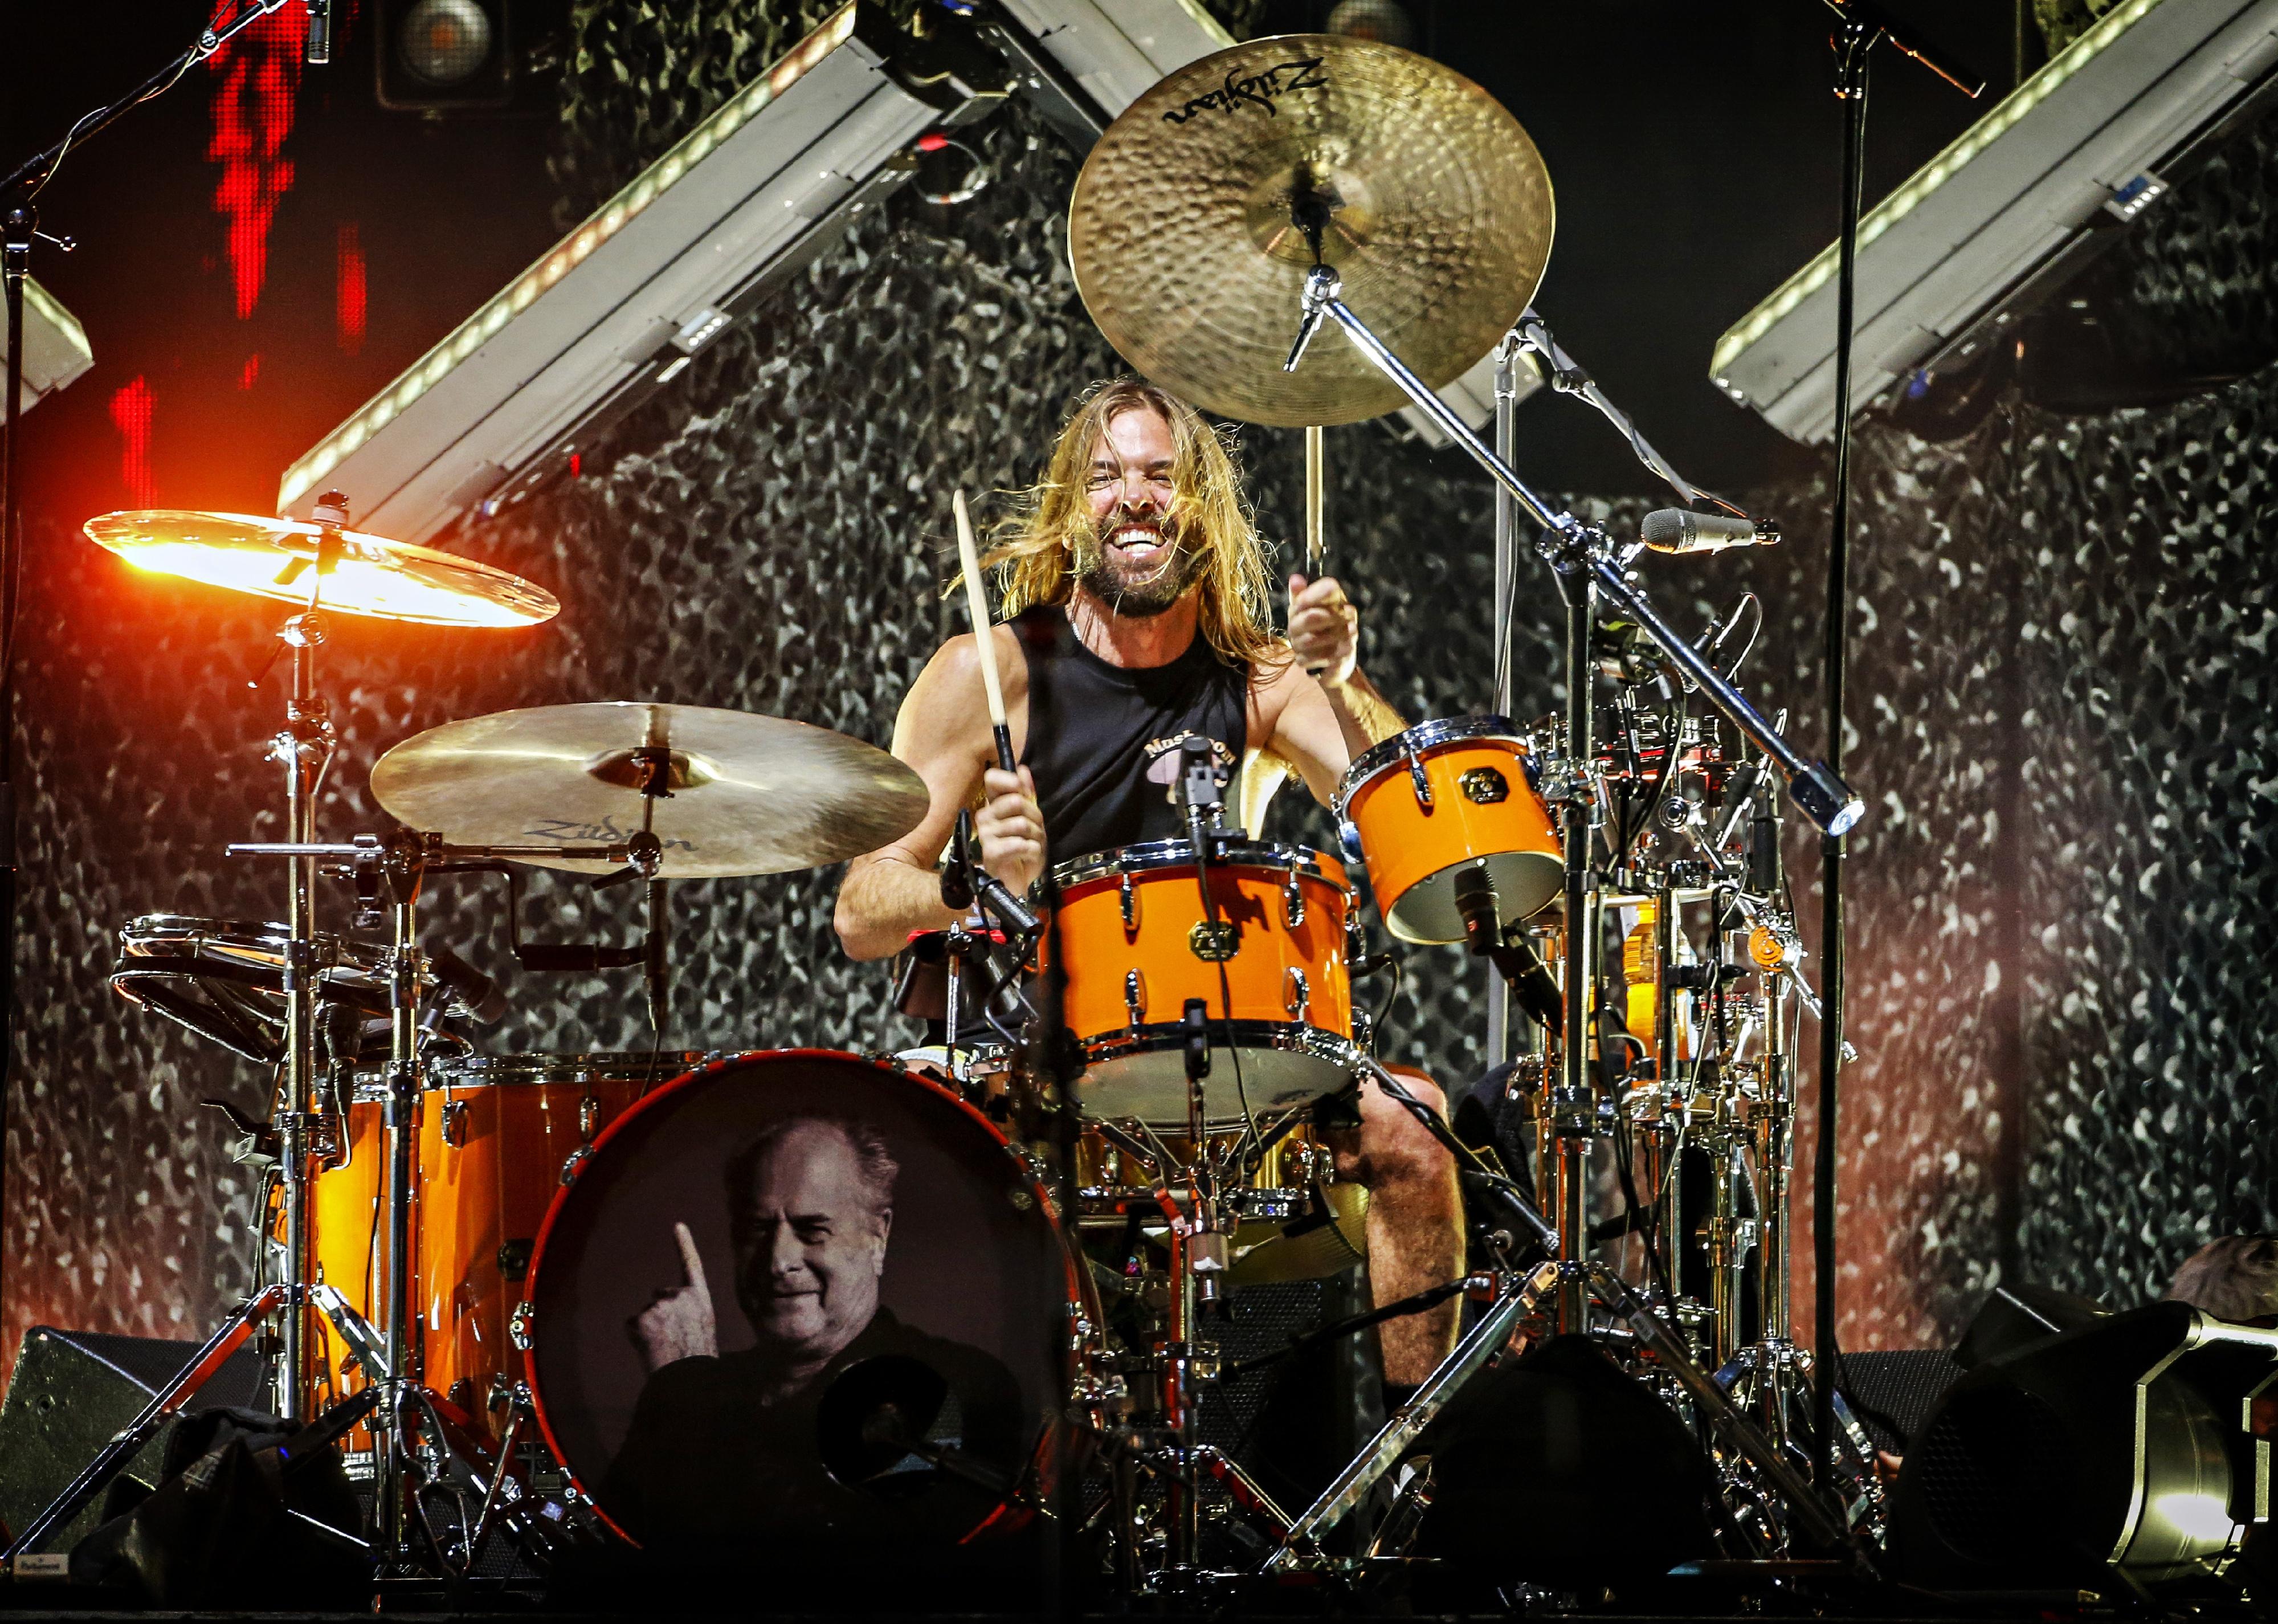 <p>The music industry was rocked to its core by the <a href="https://apnews.com/article/taylor-hawkins-foo-fighters-dead-e2044f117e4aa92566b313144fbee285">unexpected death of Foo Fighters drummer Taylor Hawkins</a> in March of 2022. A pair of subsequent tribute concerts opened with a performance of Leonard Cohen's "Hallelujah" by Dave Grohl's daughter Violet (accompanied by Alain Johannes on guitar). Guest appearances included Joan Jett, Travis Barker, Liam Gallagher, Alanis Morissette, Pink, and many others.</p>